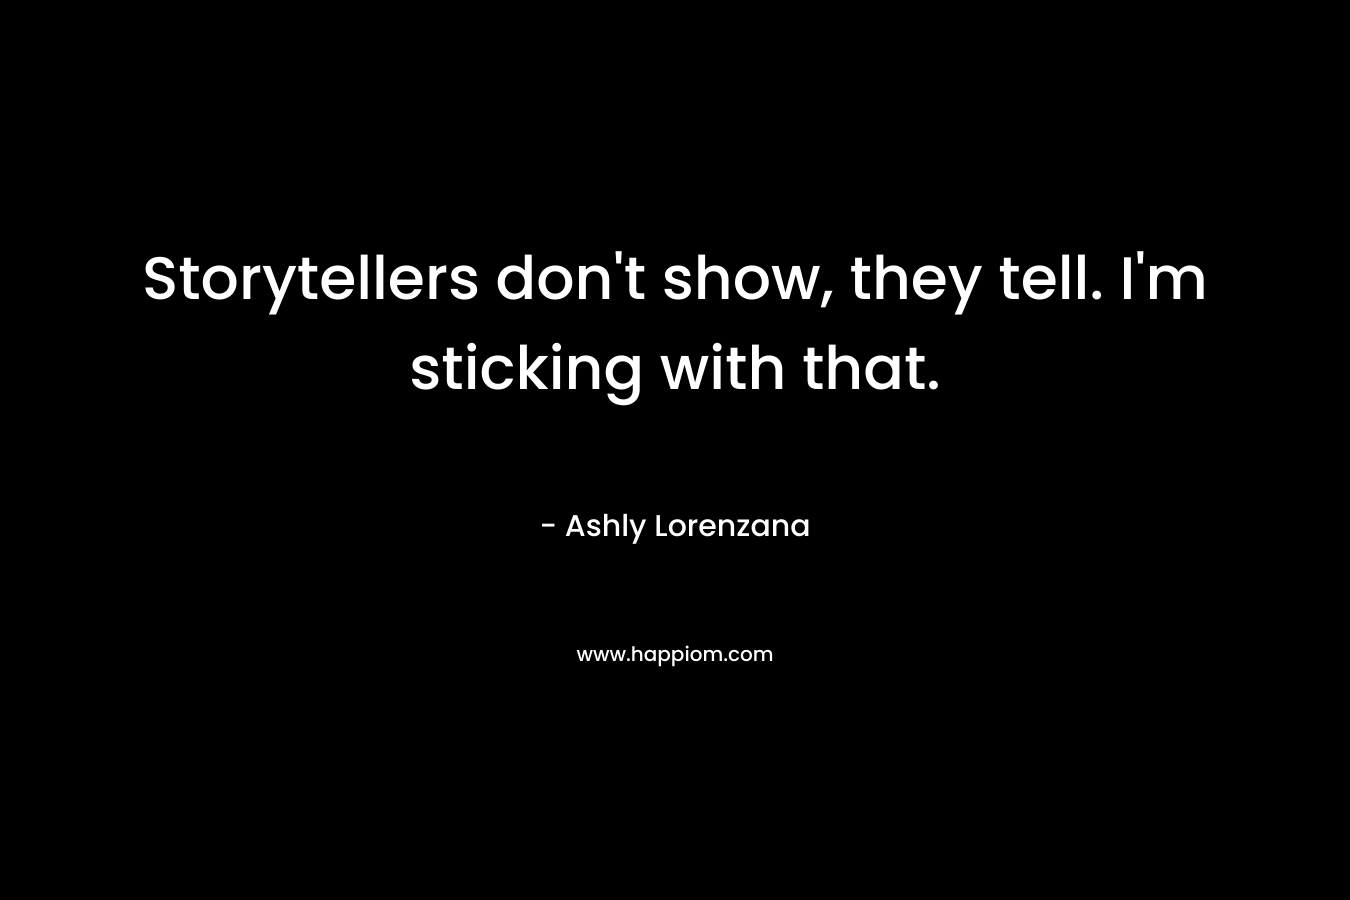 Storytellers don't show, they tell. I'm sticking with that.